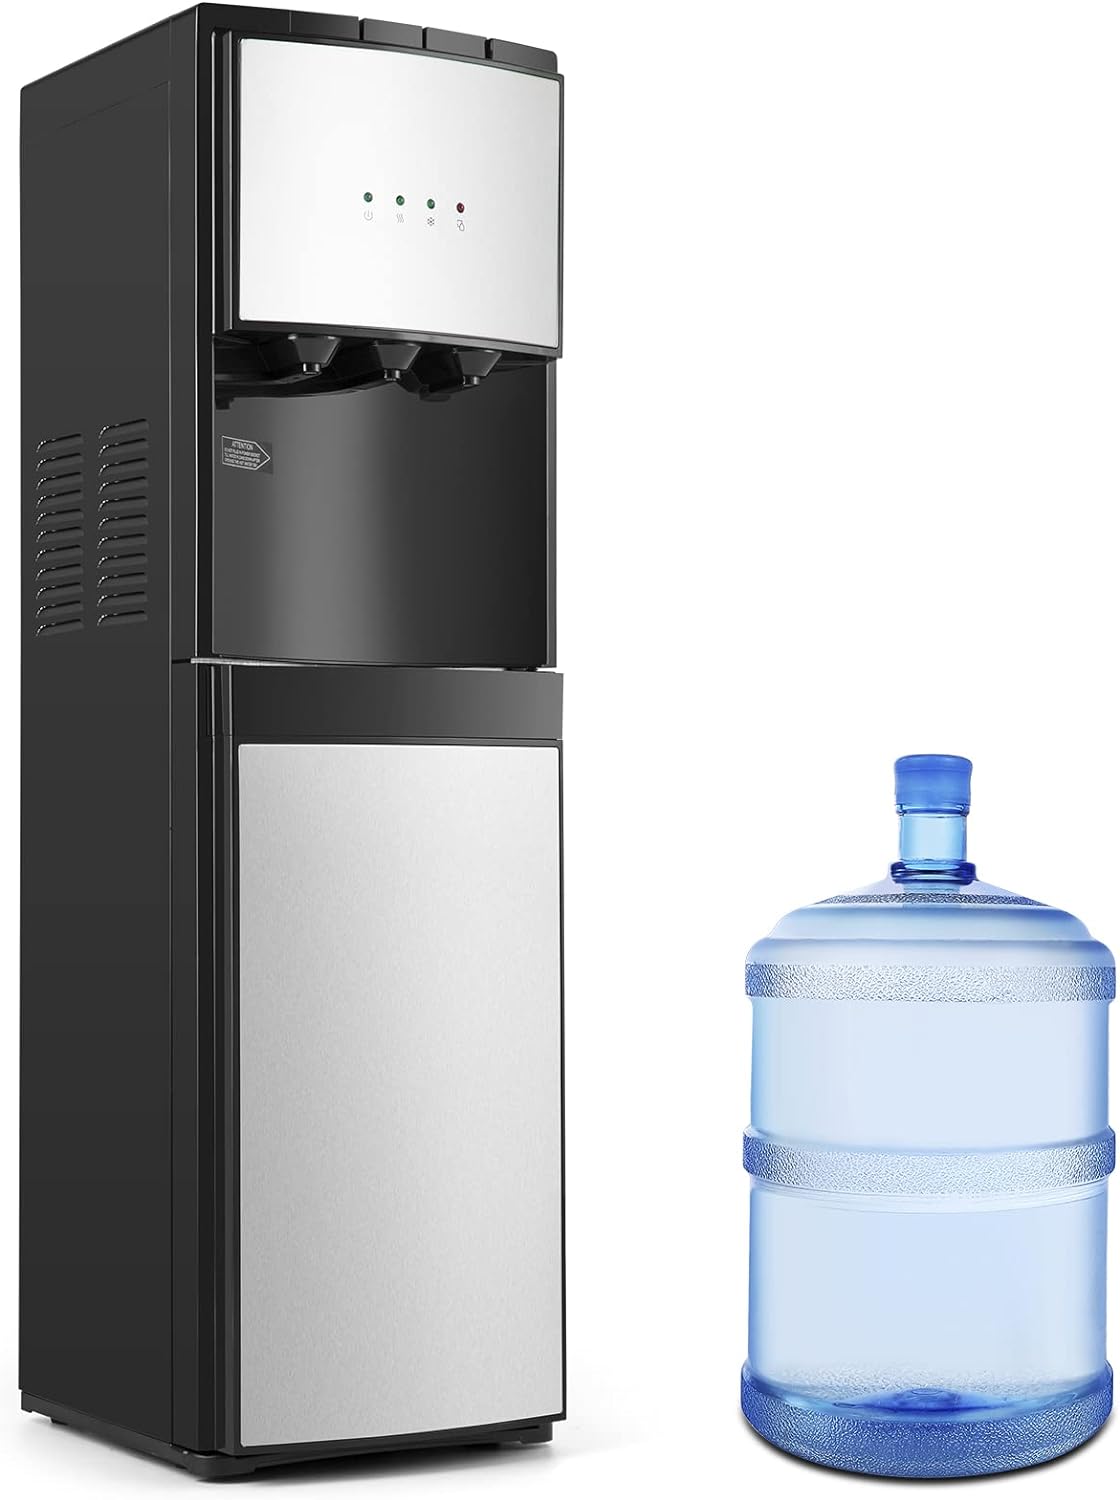 Bottom Loading Water Dispenser 5 Gallon,Hot Cold and Room Water Cooler with 3 Temperature Spouts, Empty Bottle Indicator Child Safety Lock Stainless Steel Black Home and Office Use